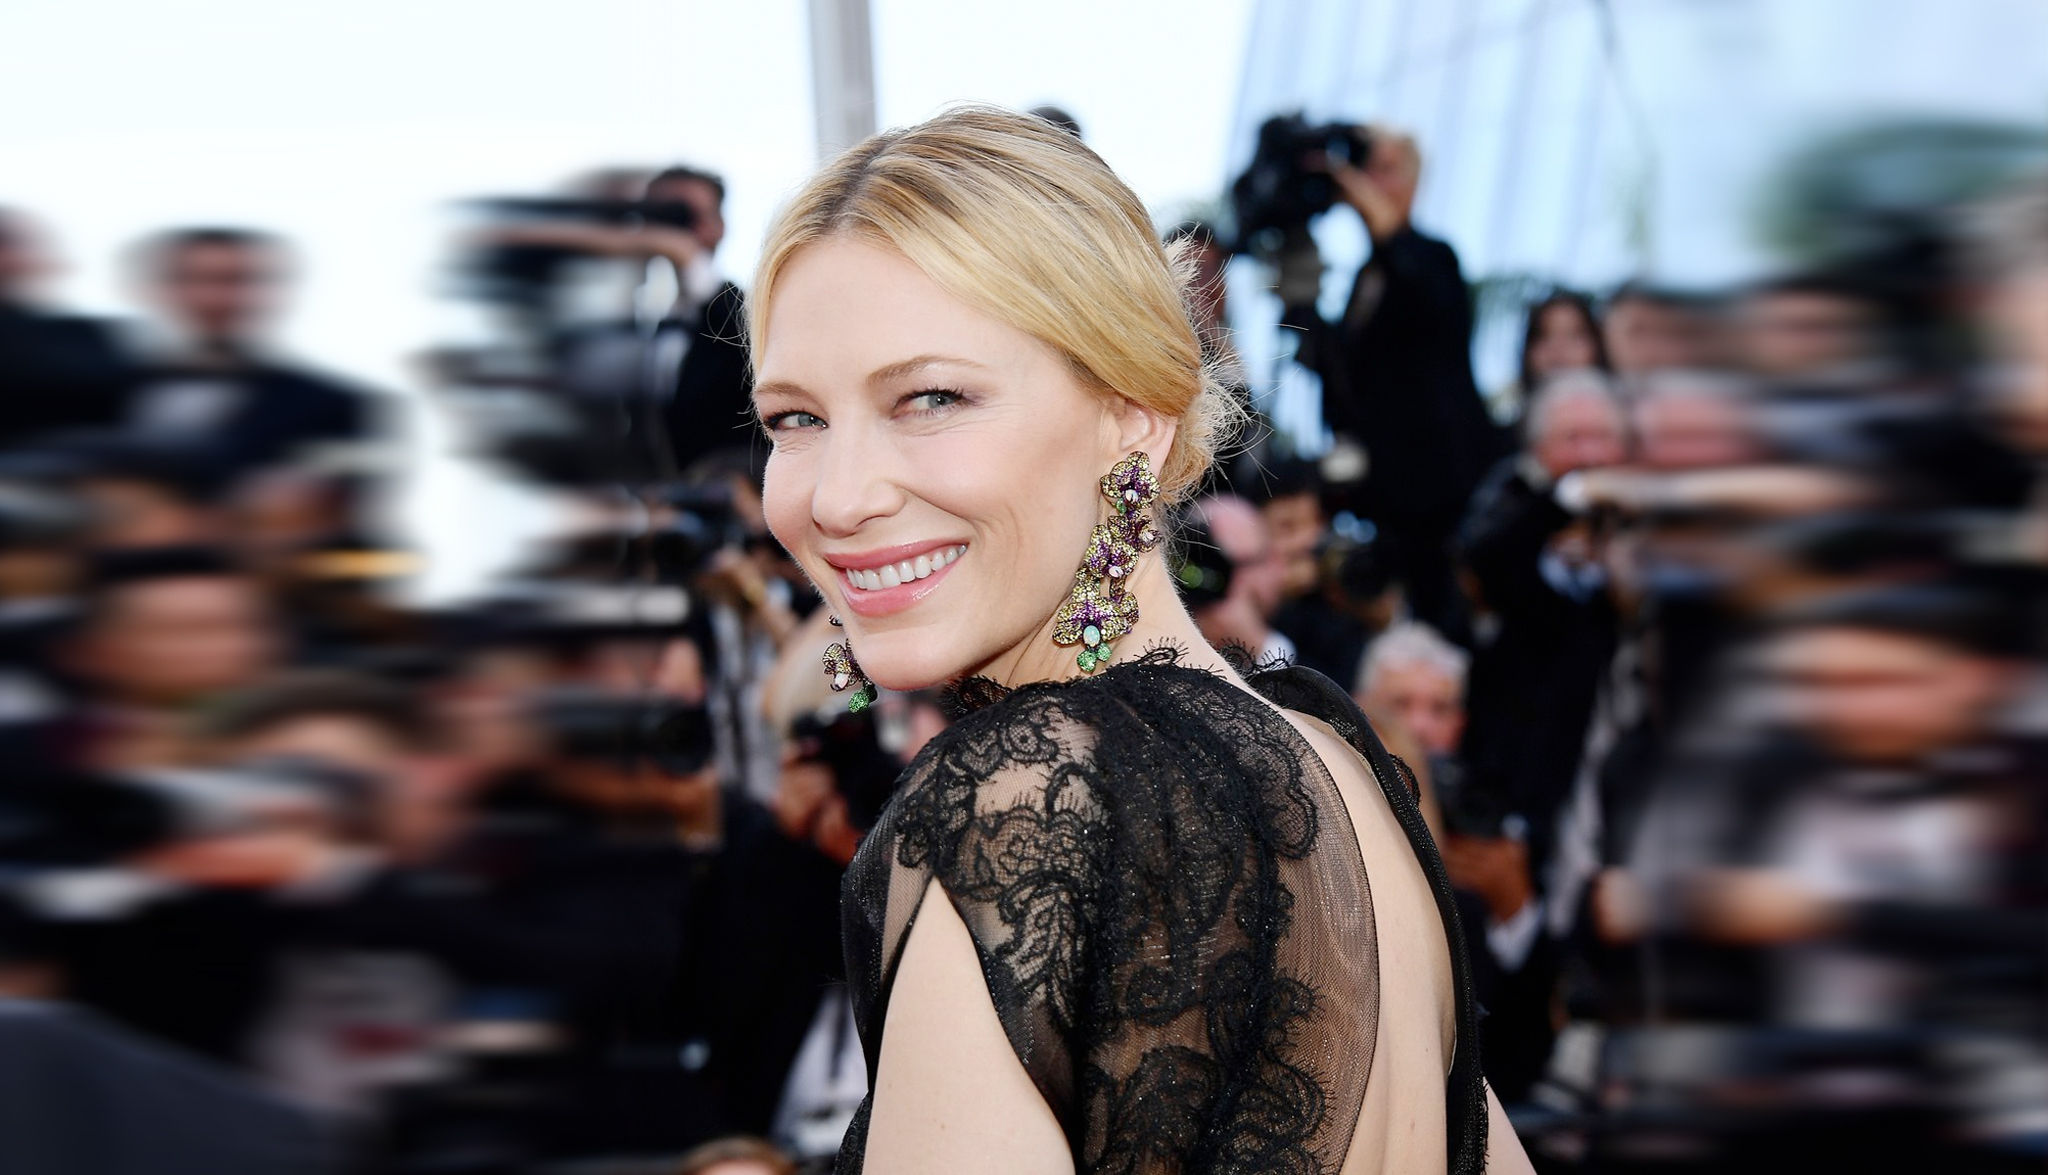 Cannes 2018: The magnificent jewels that sparkled down the red carpet